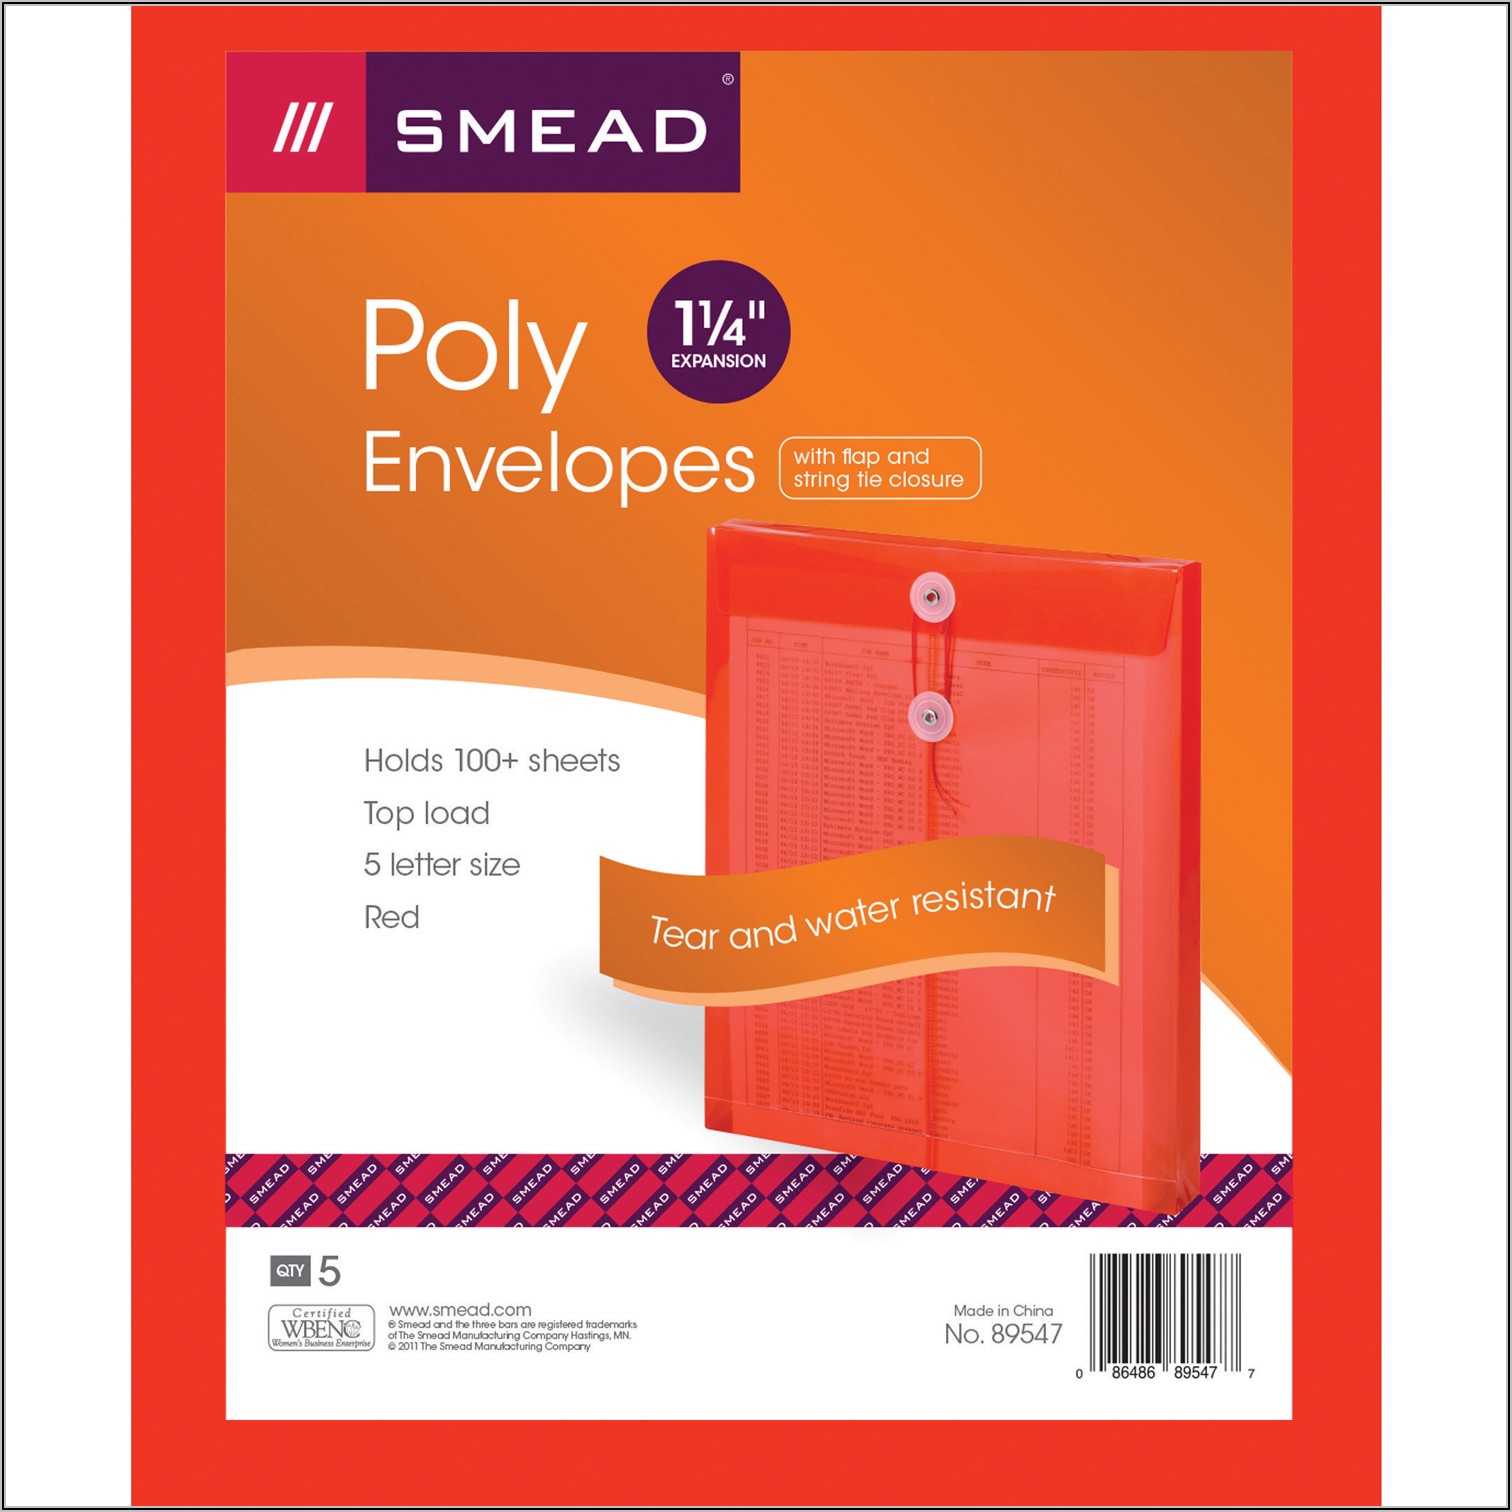 Smead Poly Envelopes With String Tie Closure